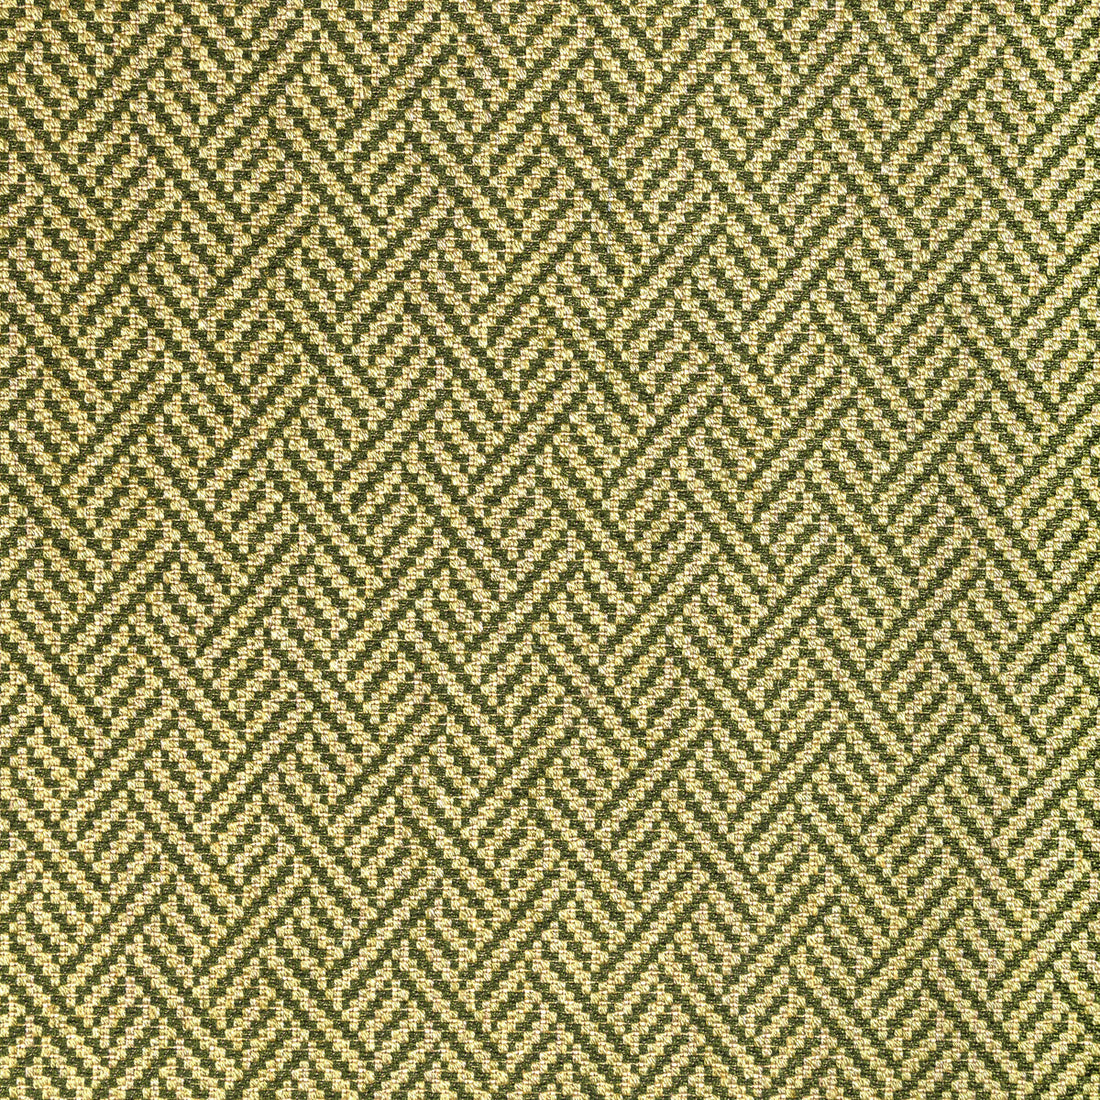 Colbert Weave fabric in green color - pattern 8022108.30.0 - by Brunschwig &amp; Fils in the Lorient Weaves collection